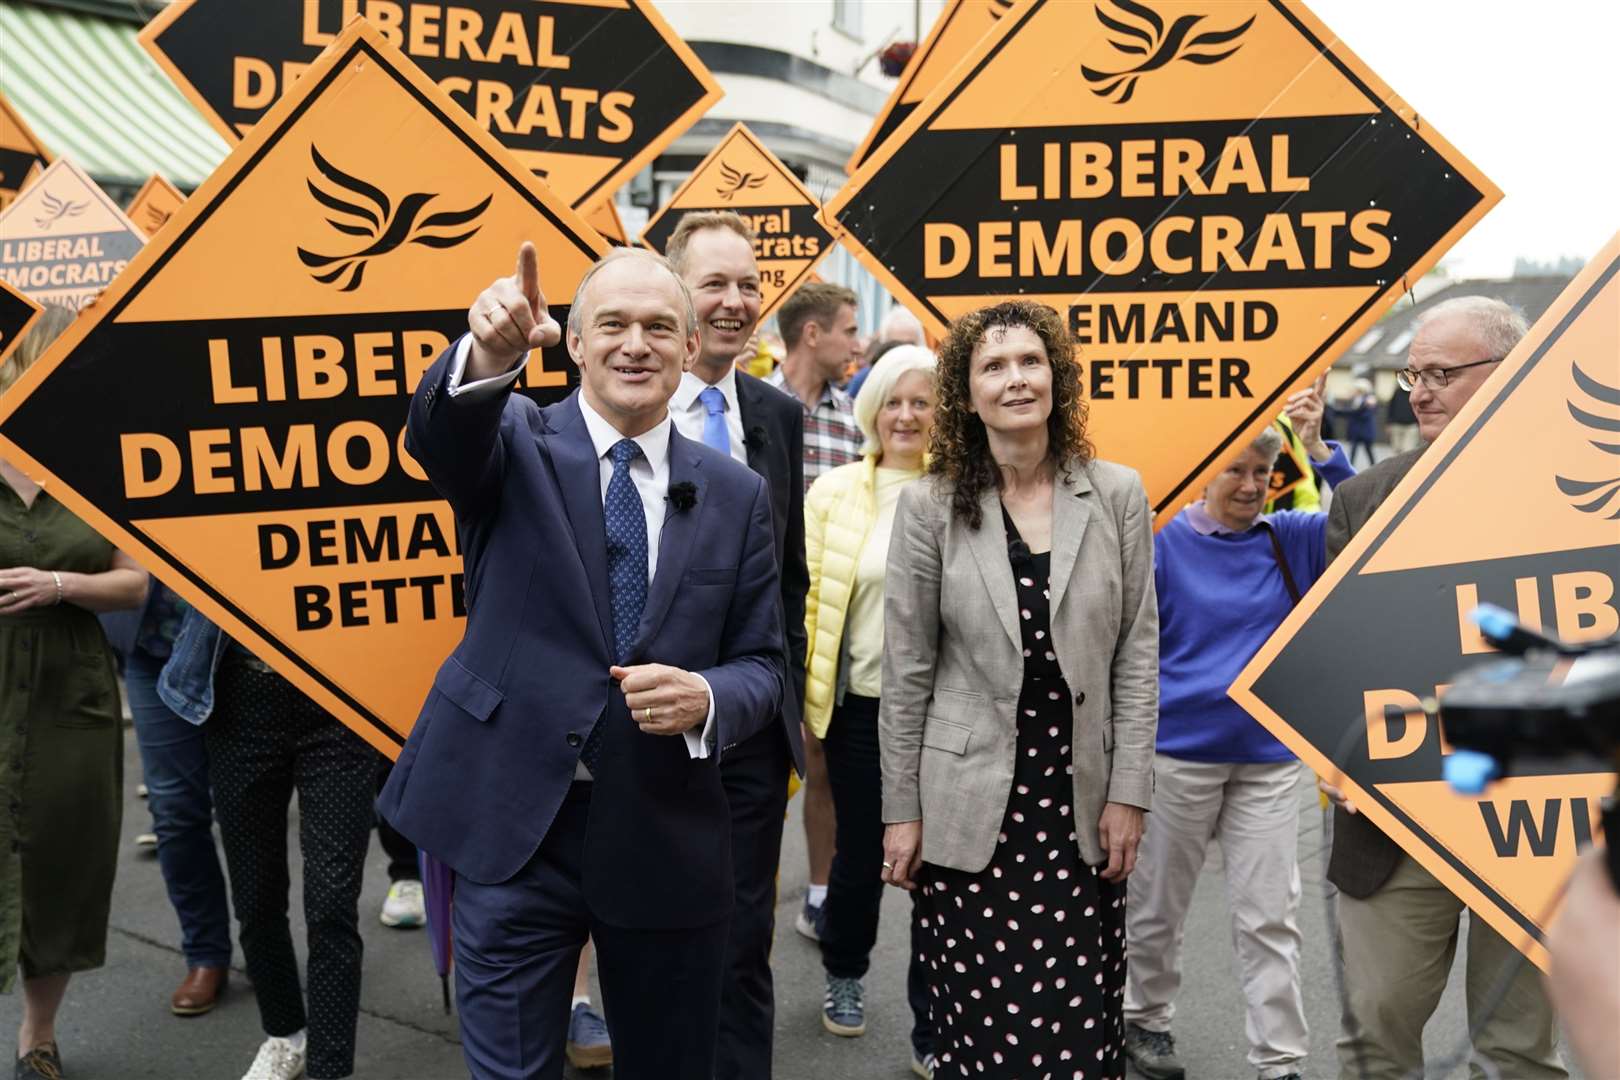 Liberal Democrat Leader Sir Ed Davey (left) and party chief whip Wendy Chamberlain walk with Richard Foord, in Tiverton town centre, after he was elected MP for Tiverton and Honiton in the by-election (Andrew Matthews/PA)